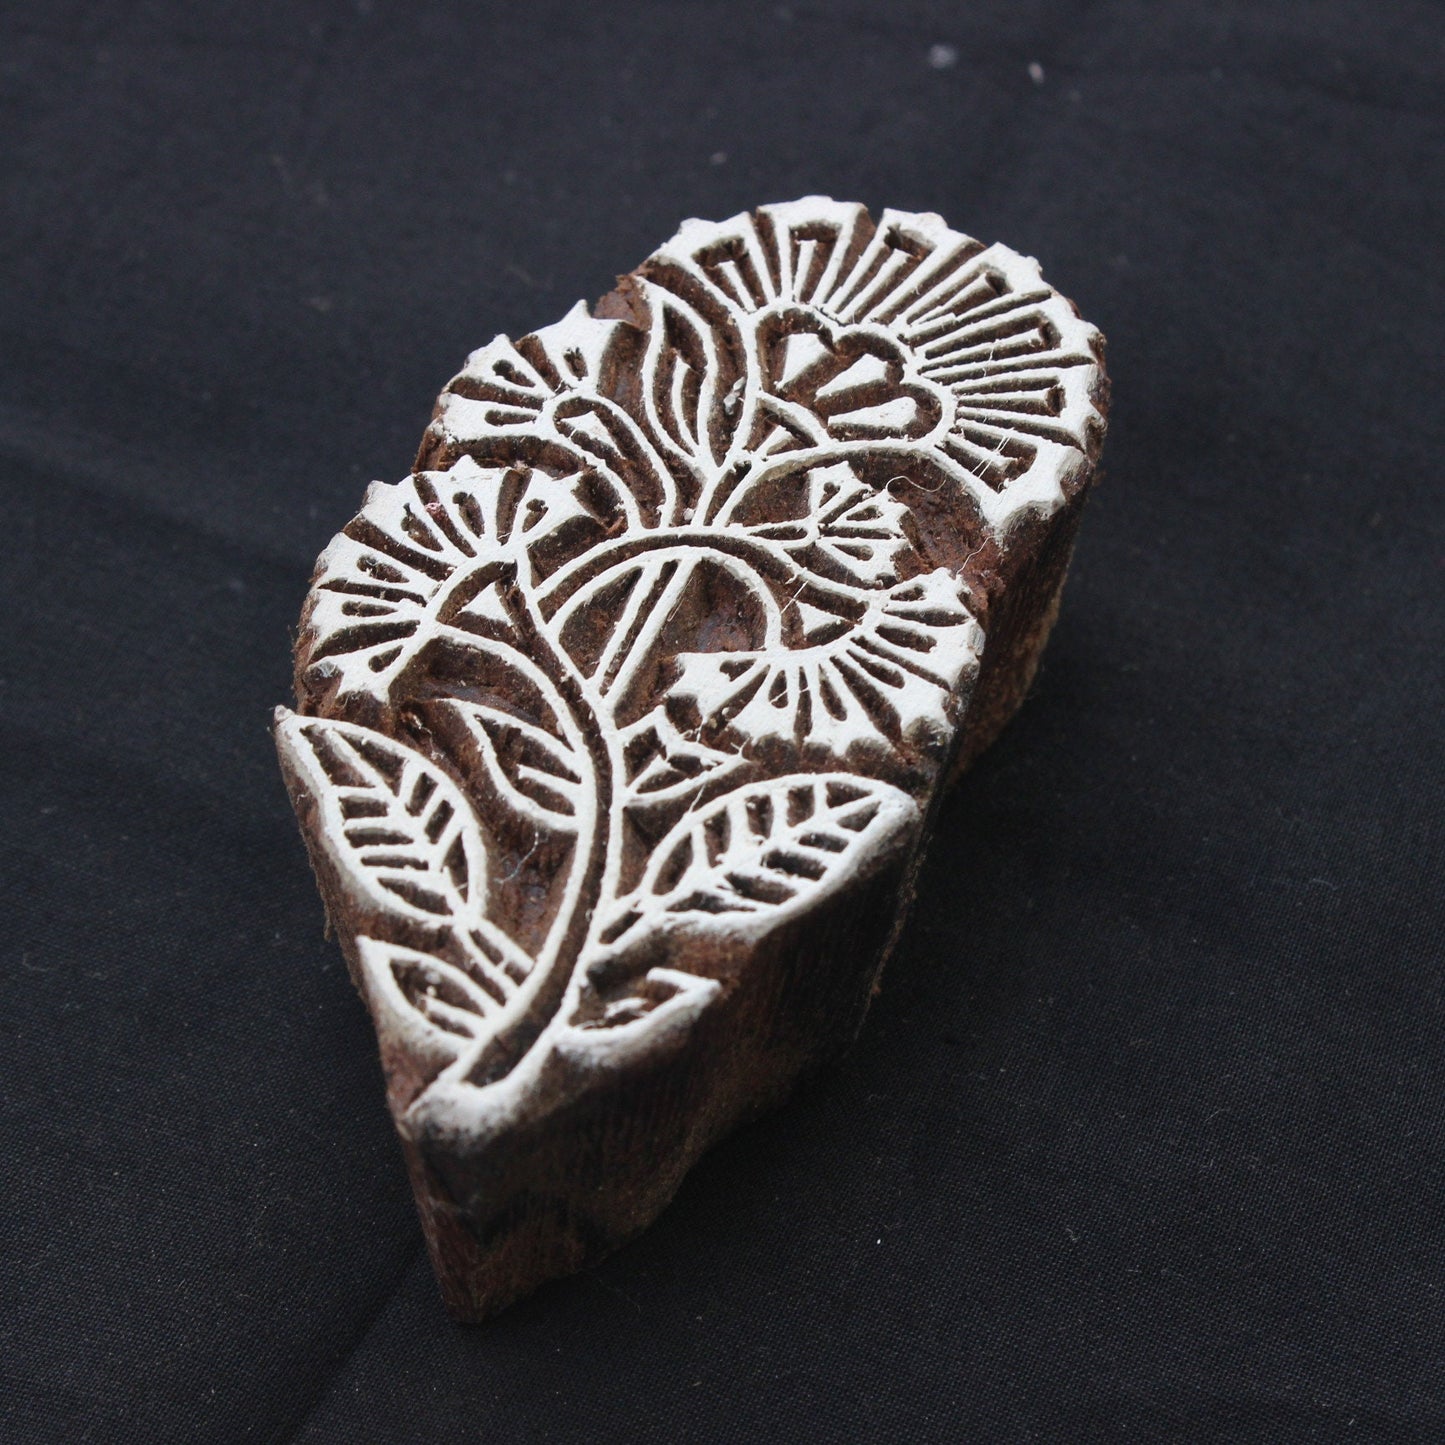 Floral Block Stamp Paisley Wooden Block Stamp Indian Fabric Stamp Flower Wood Block Stamp Indian Textile Block For Printing Fern Soap Stamp